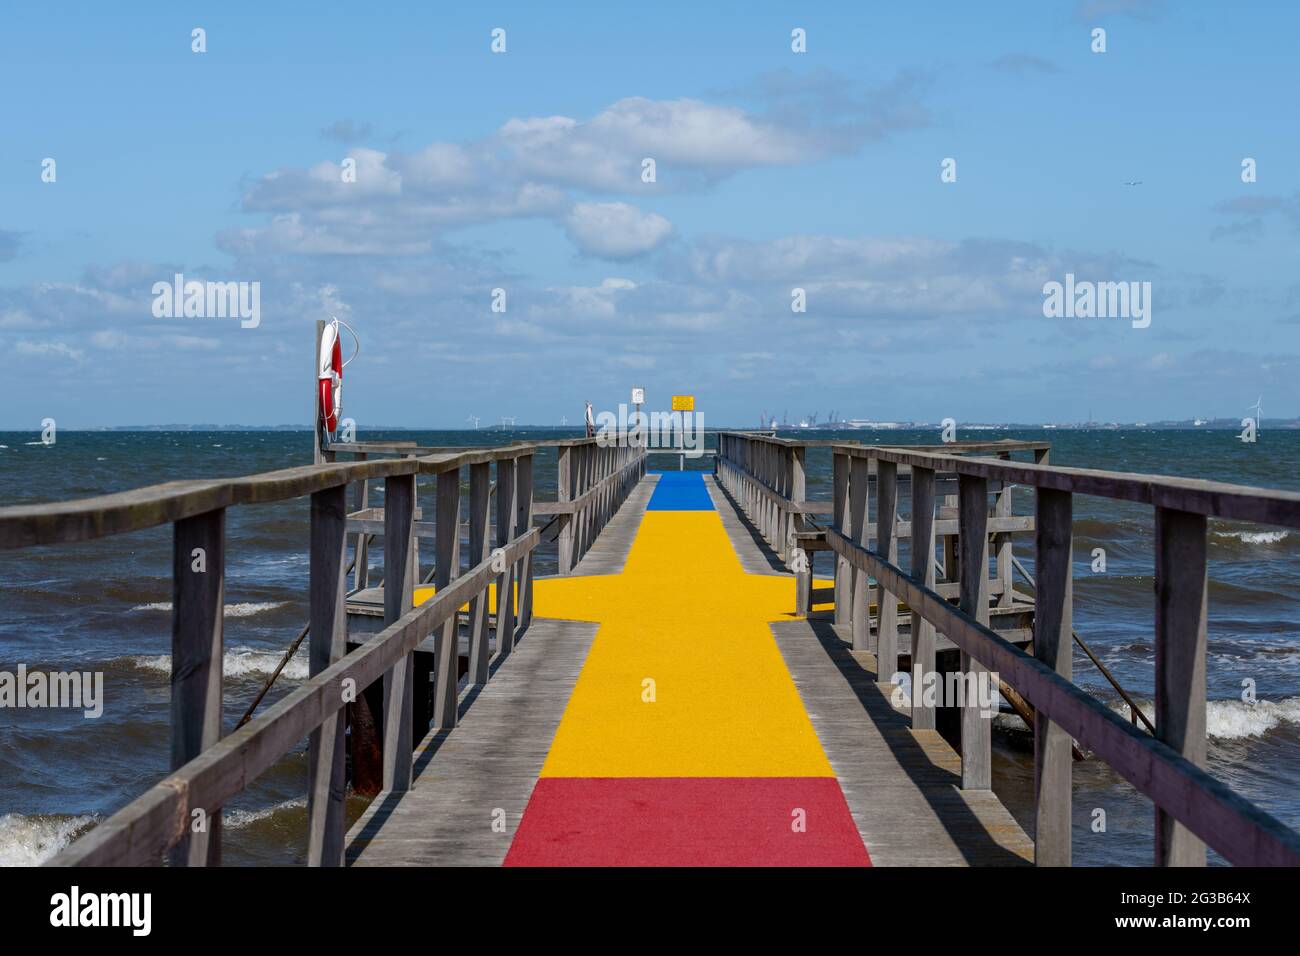 A jetty with a colourful carpet in blue, yellow and red. A blue ocean and sky in the background. Picture from Scania county, Sweden Stock Photo